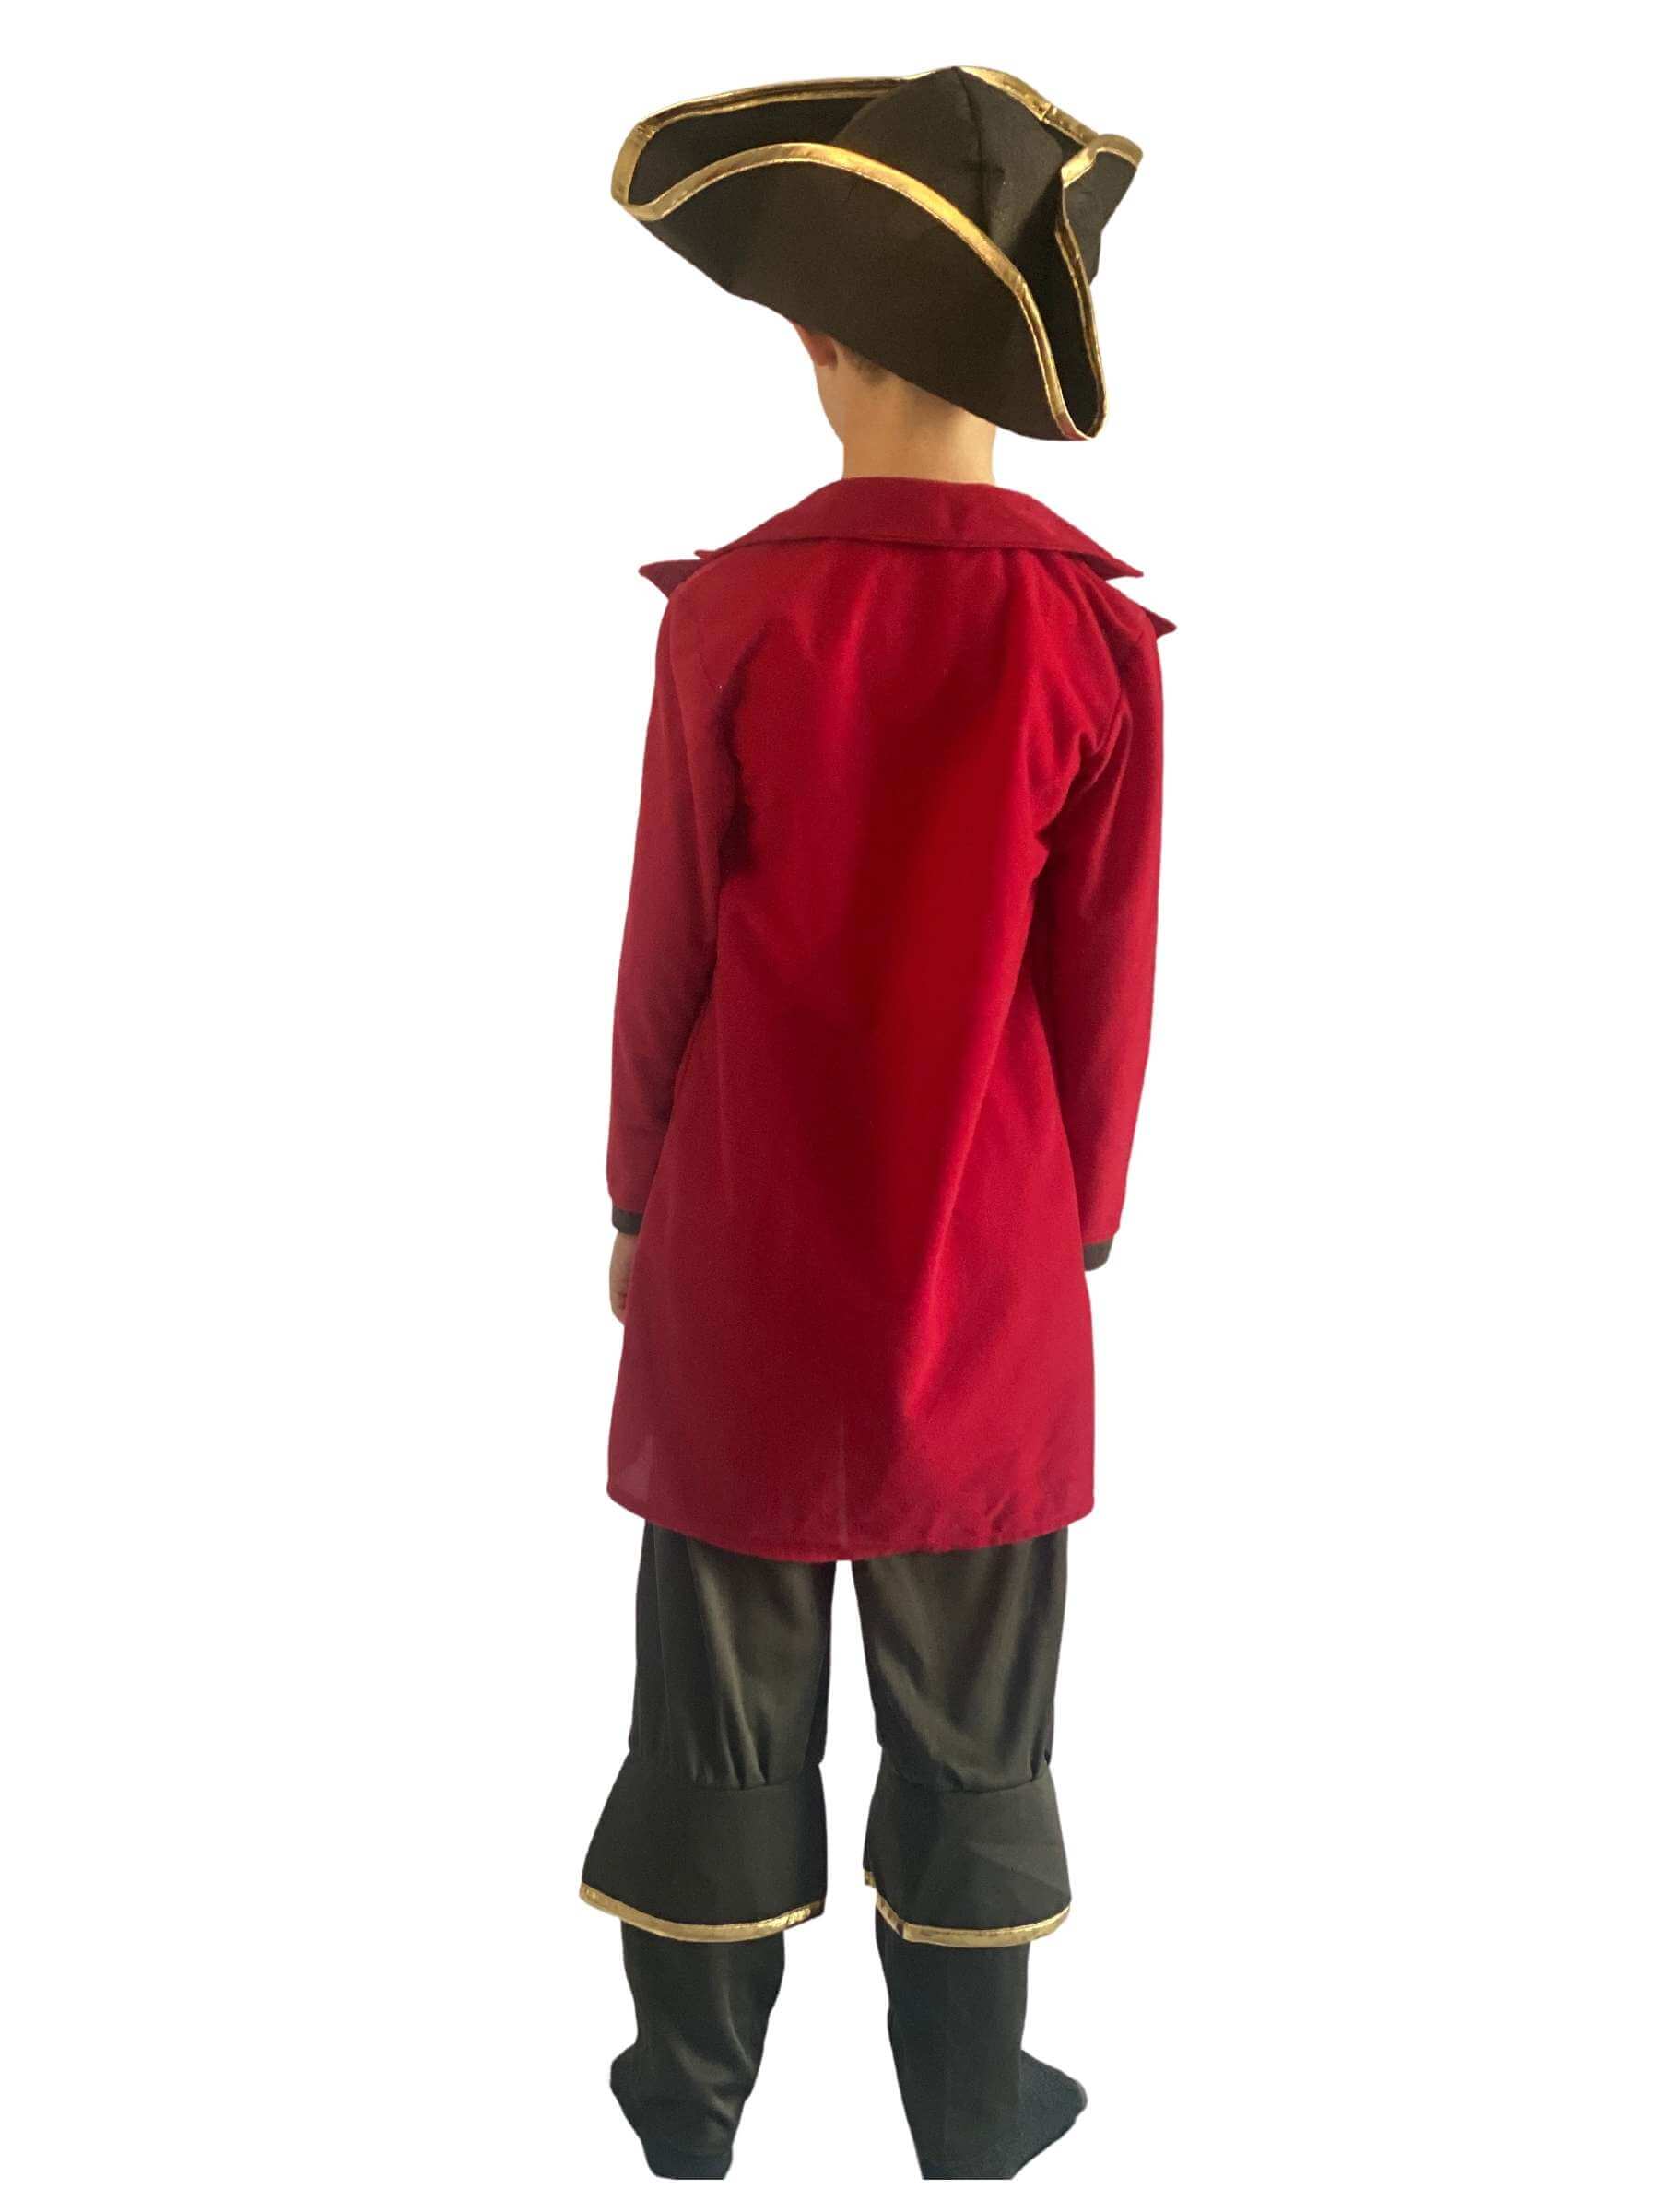 The back of a child wearing a red and black pirate captain costume with hat.